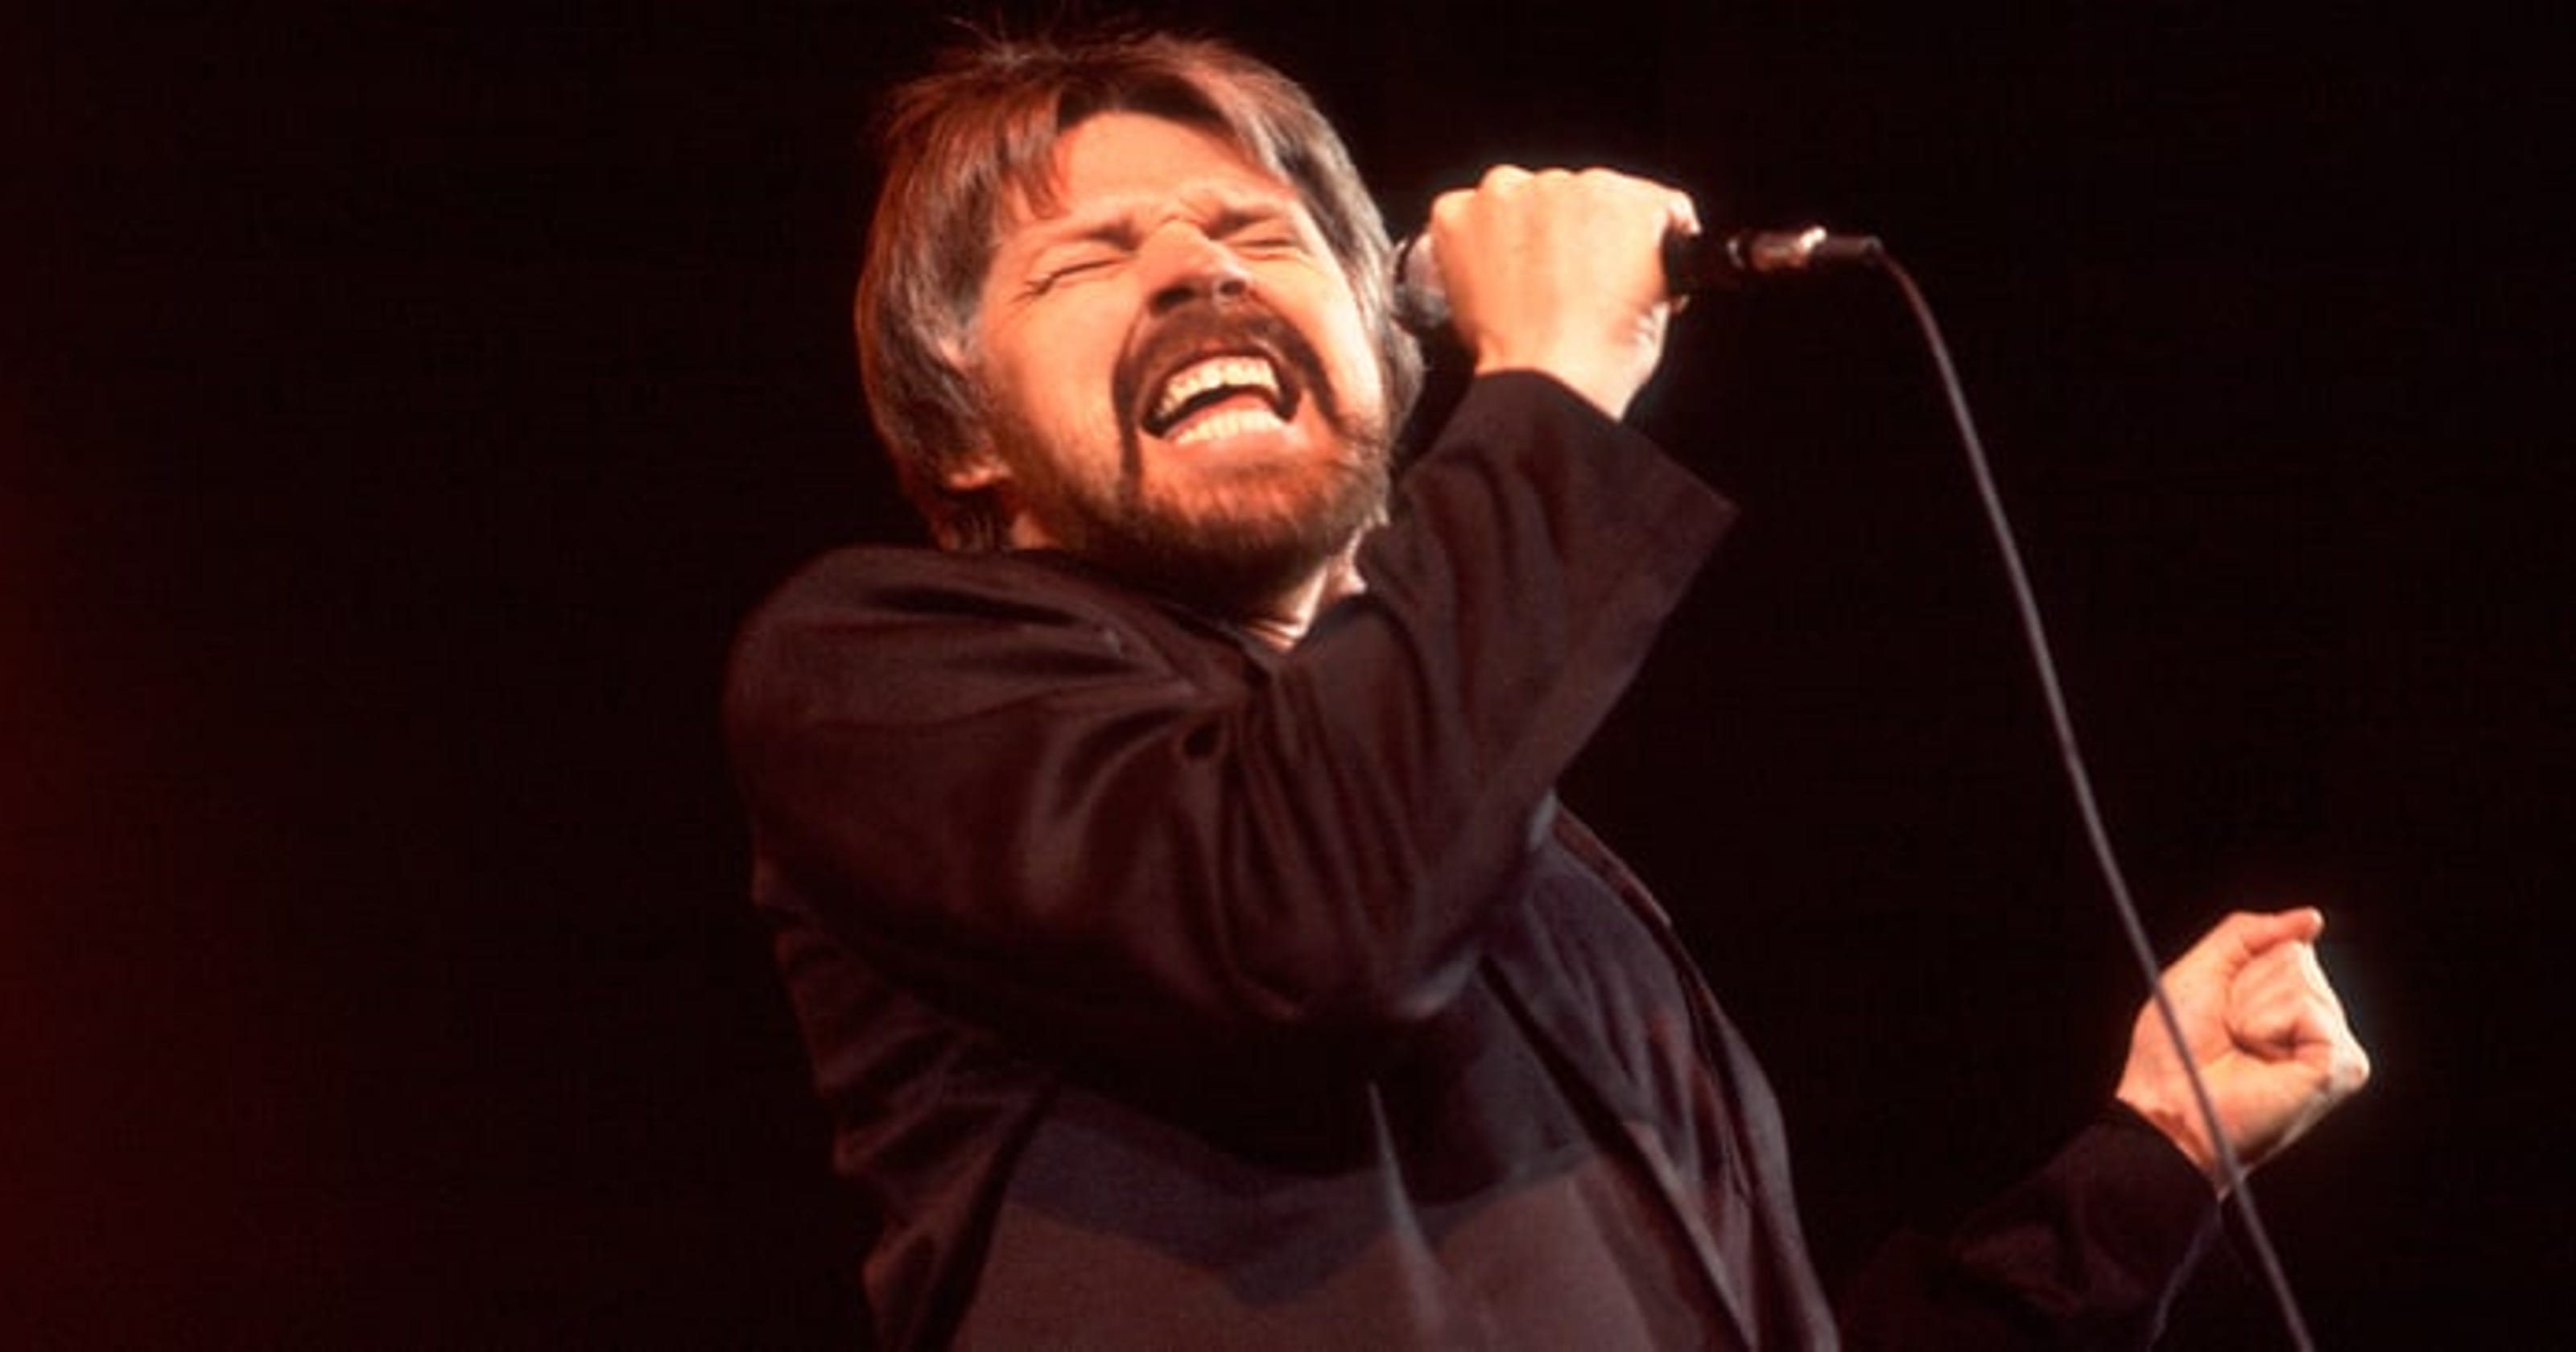 FIRST LISTEN Hear Bob Seger songs as his music goes streaming